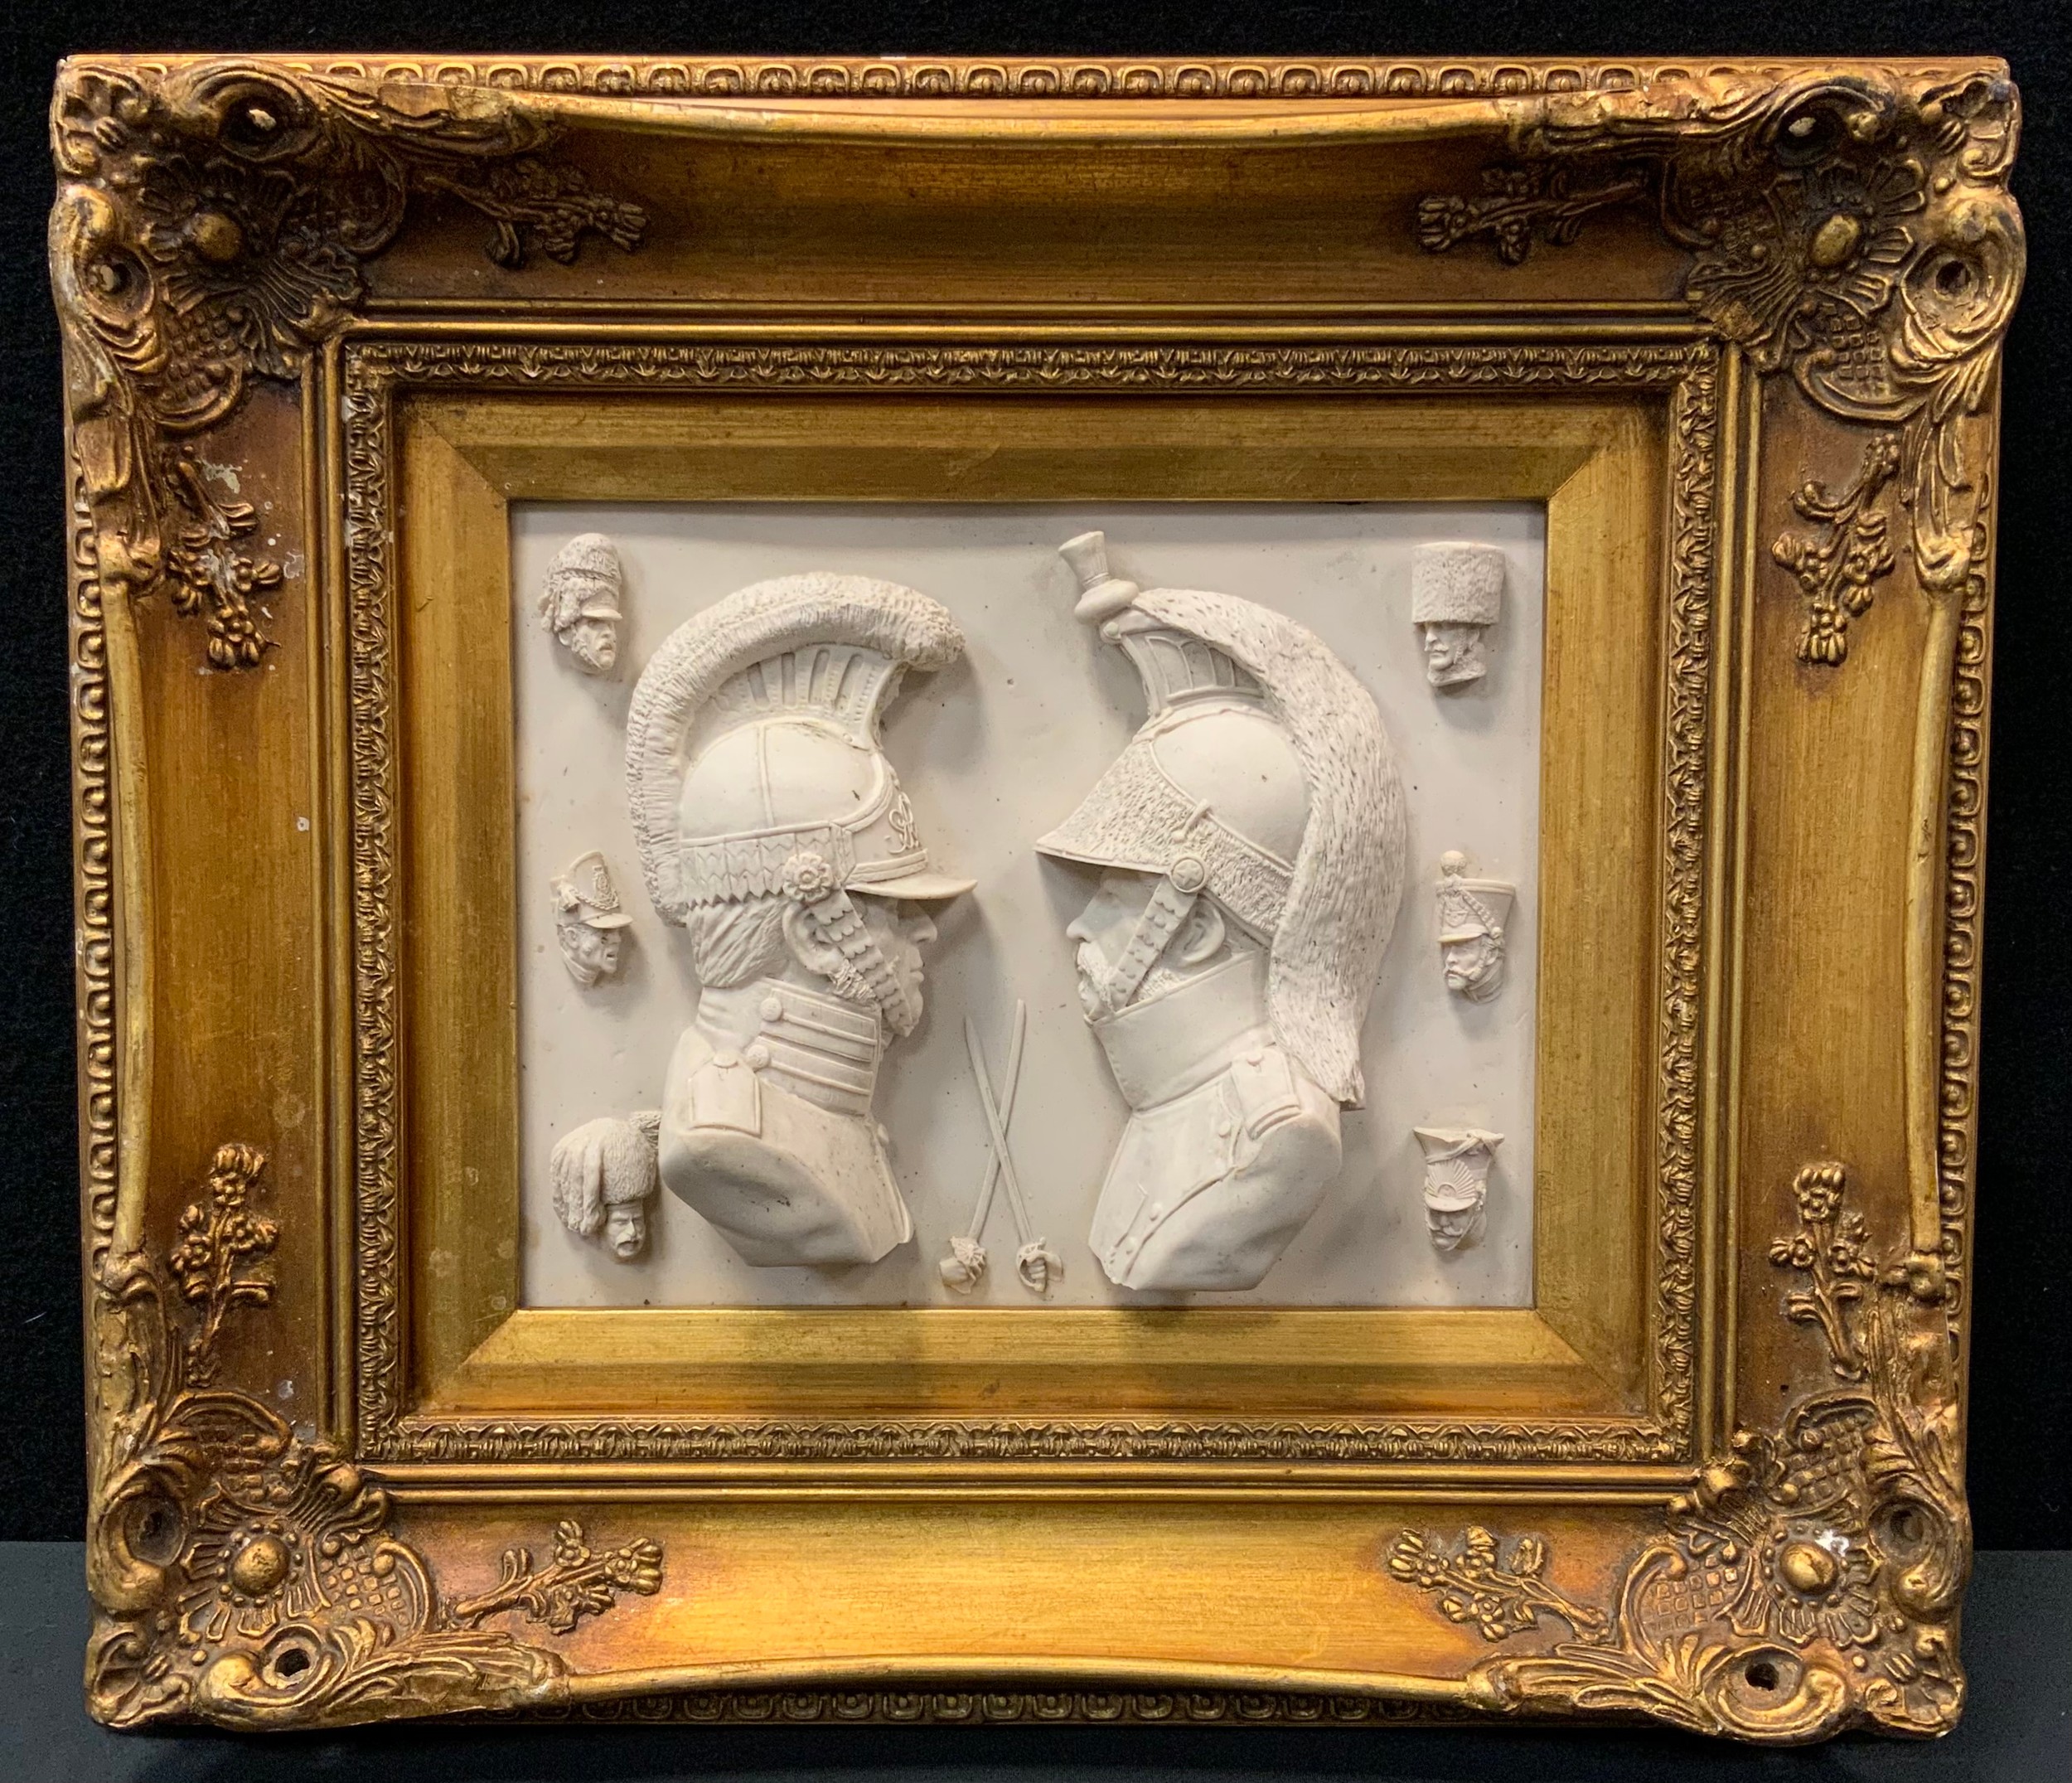 A neoclassical panel relief decorated with Military officers facing each others, crossed swords